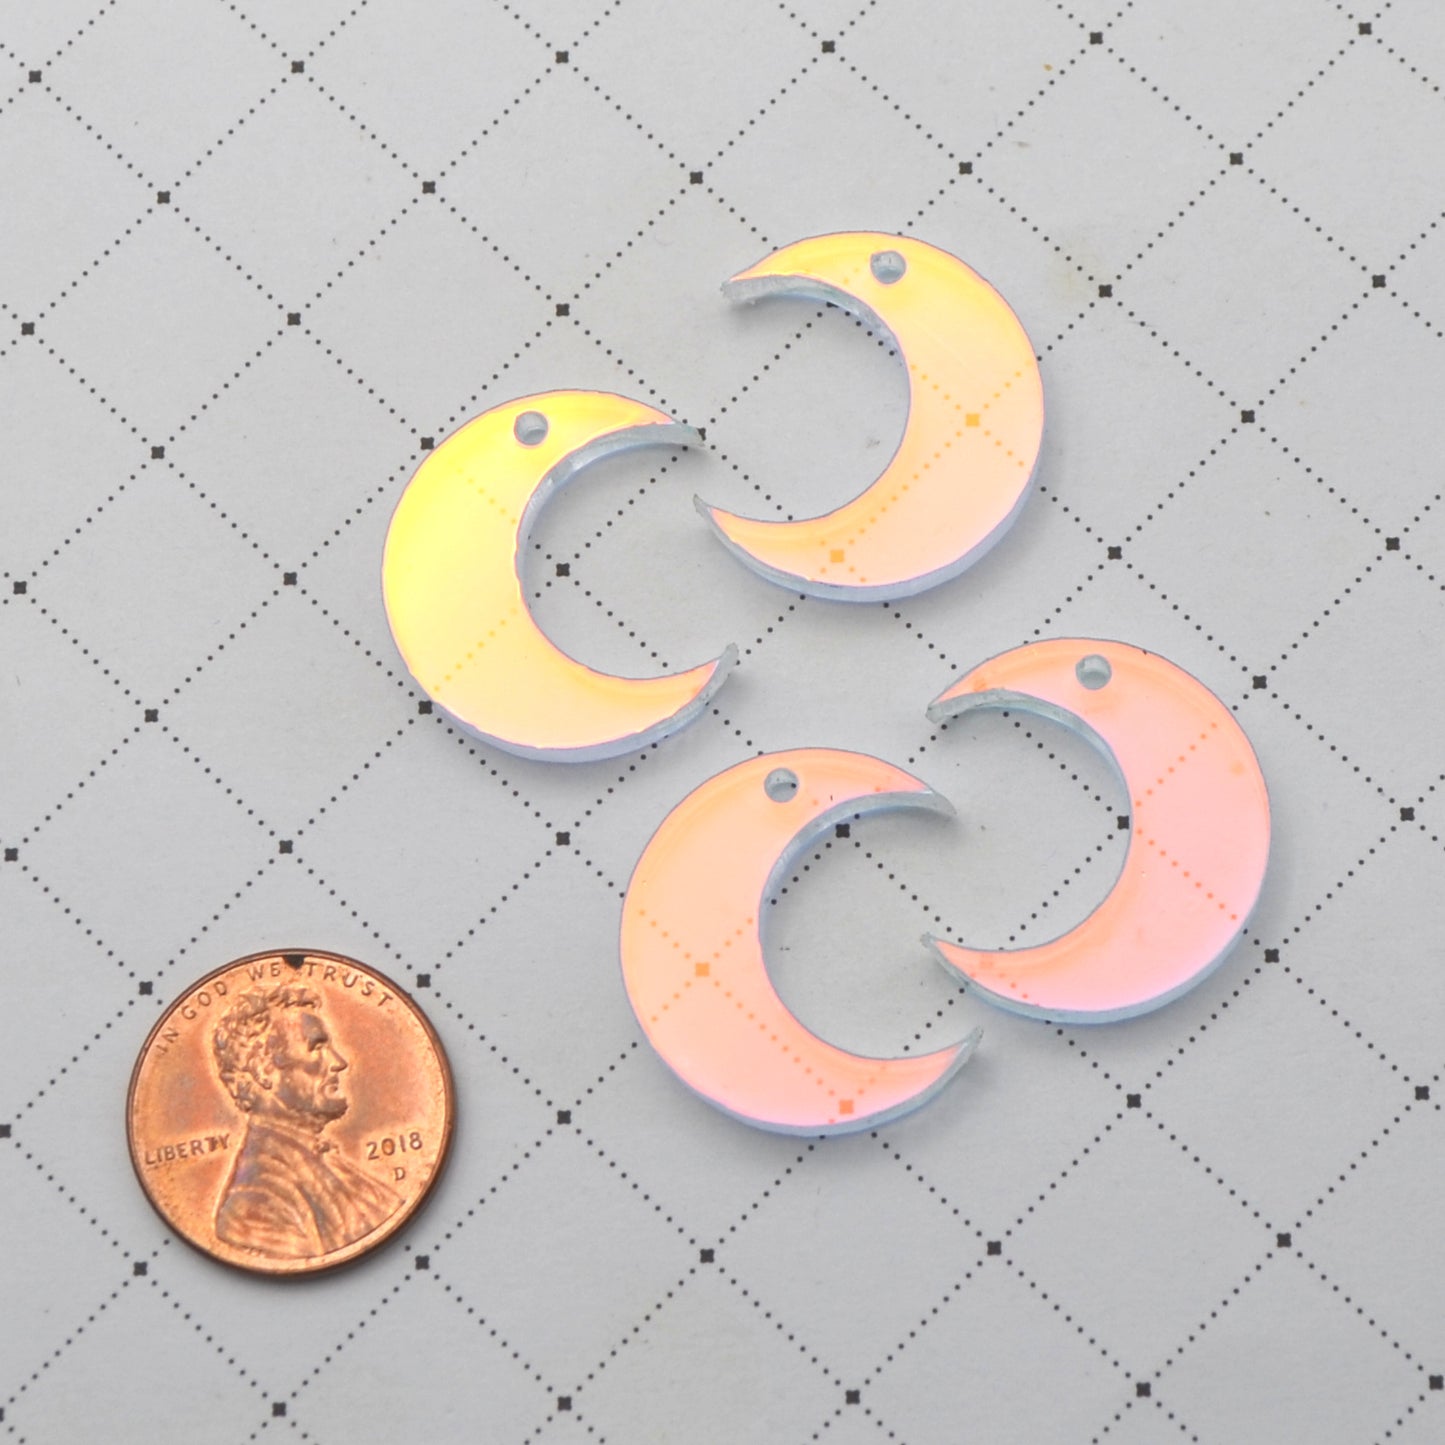 4 Iridescent Moon Charms in Iridescent Laser Cut Acrylic